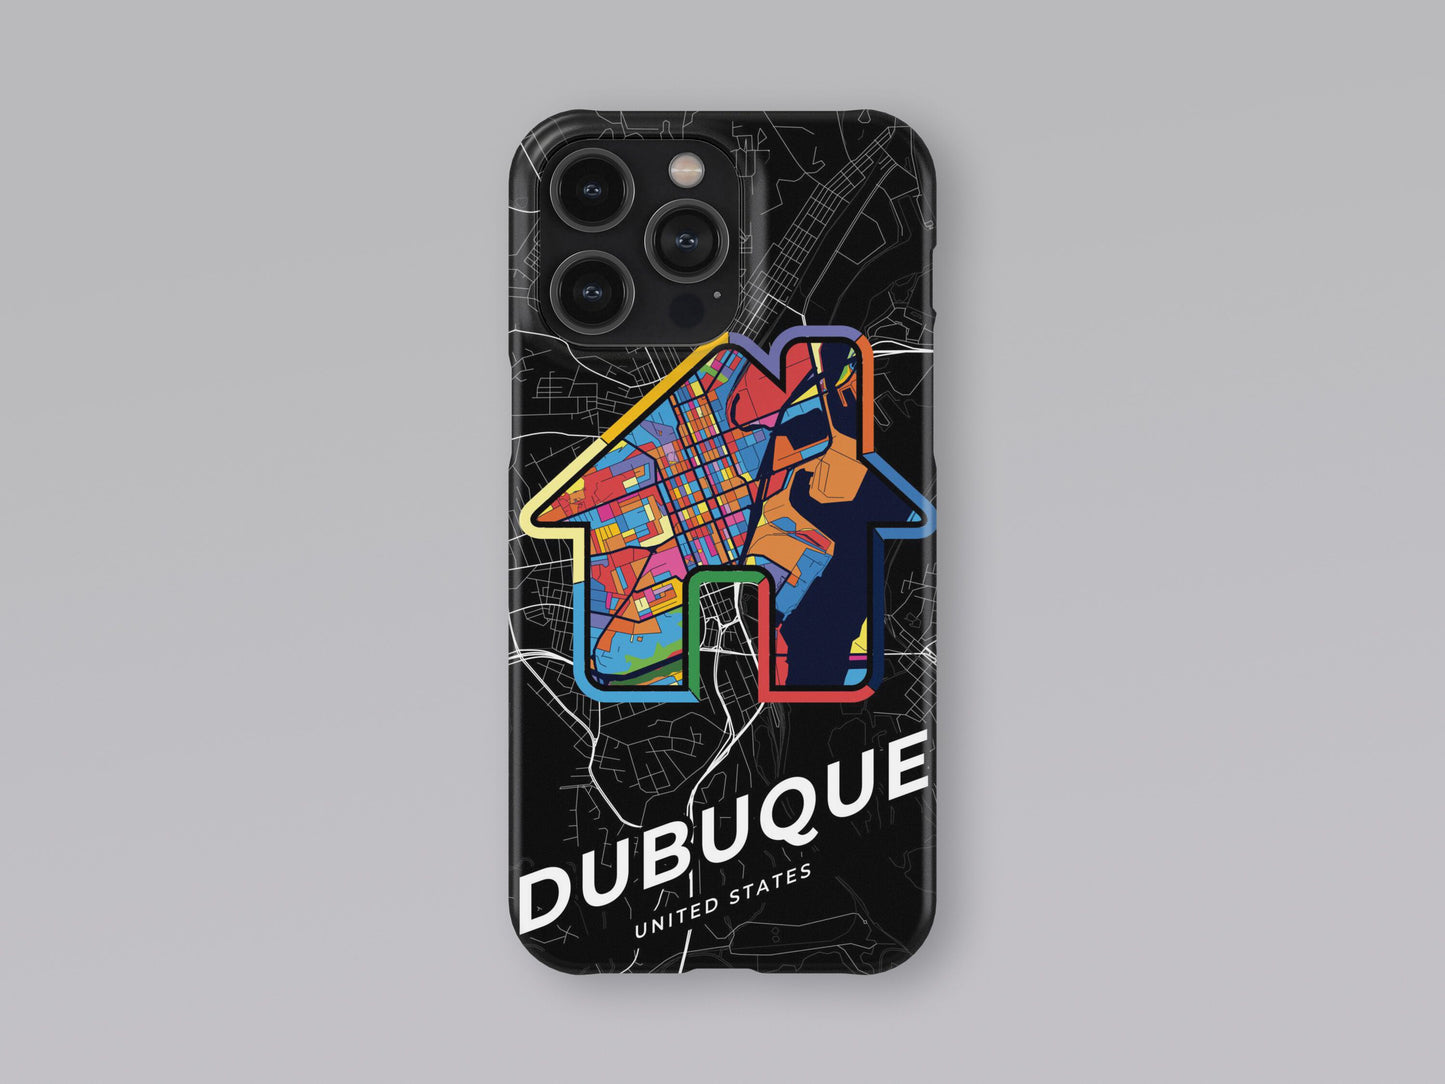 Dubuque Iowa slim phone case with colorful icon. Birthday, wedding or housewarming gift. Couple match cases. 3